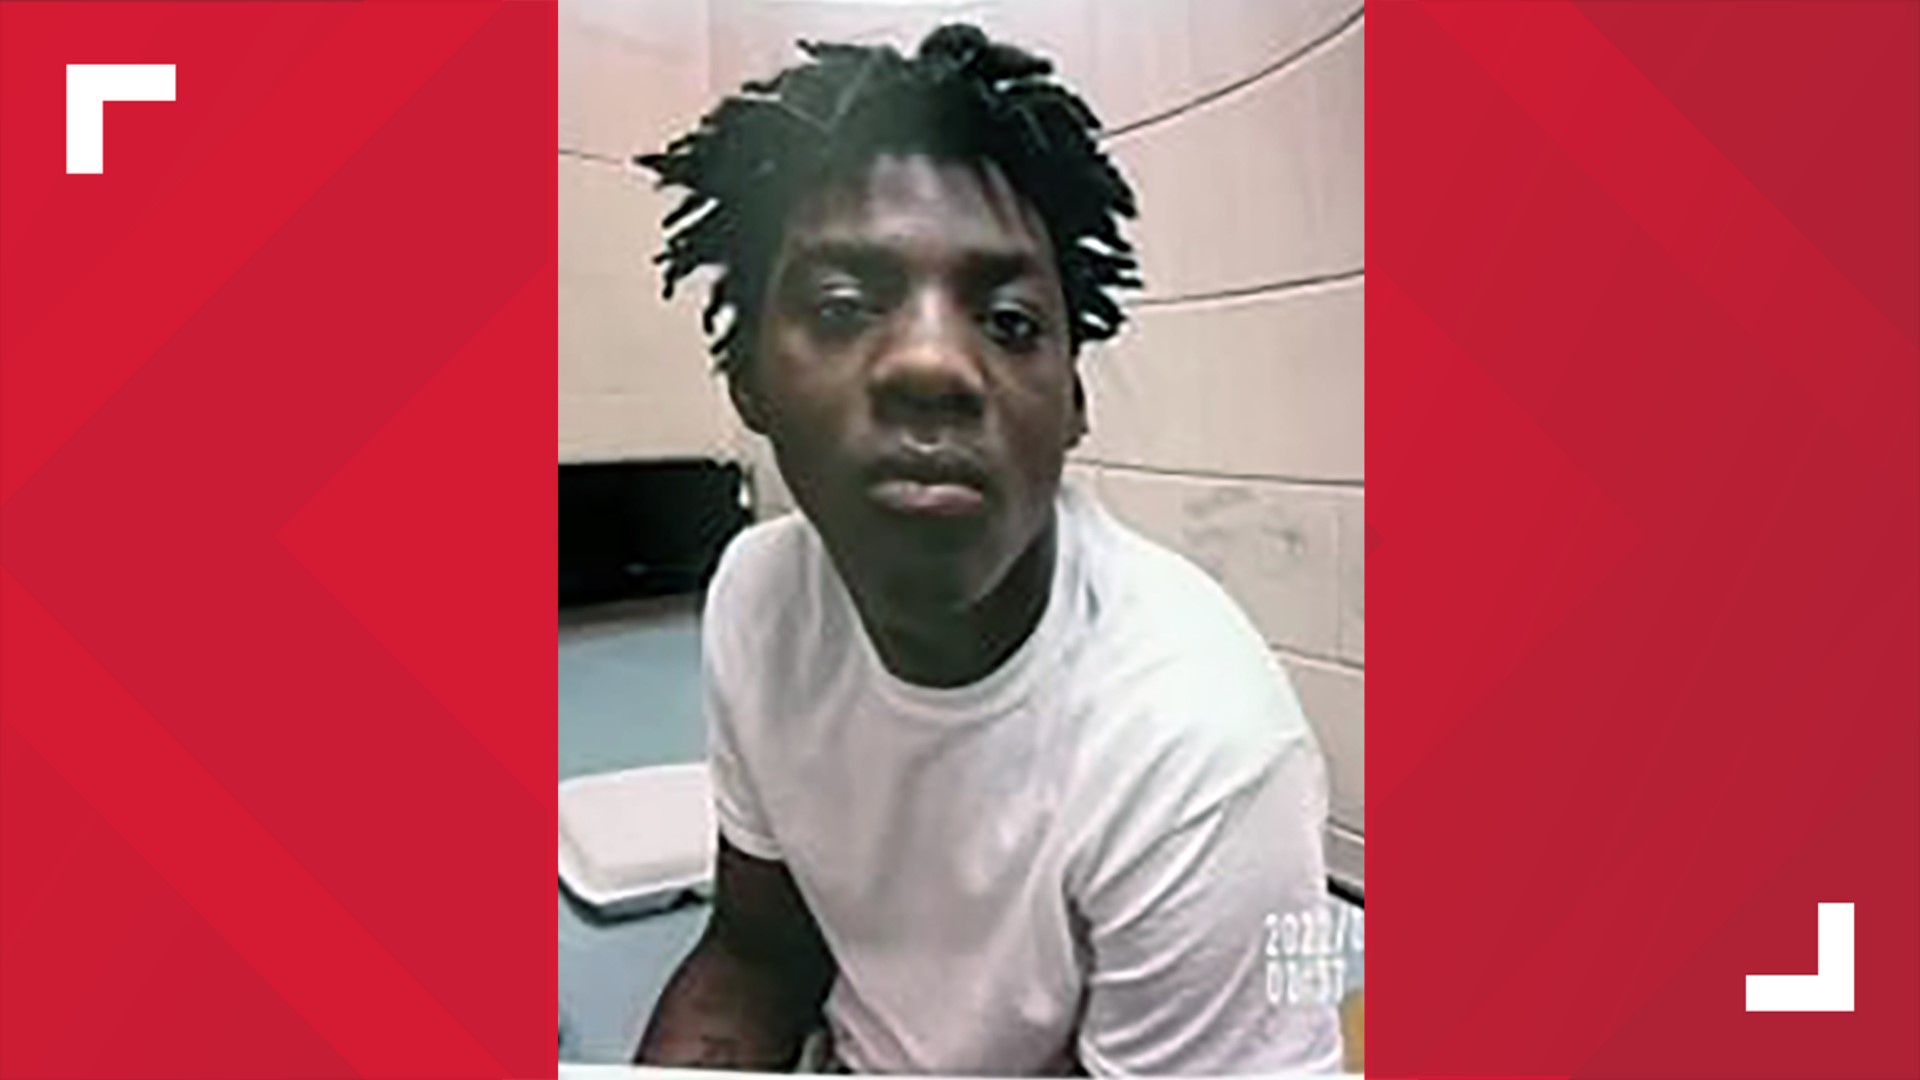 17-year-old Curtis Tassin escaped while he was being transported to the New Orleans Juvenile Justice Intervention Center.